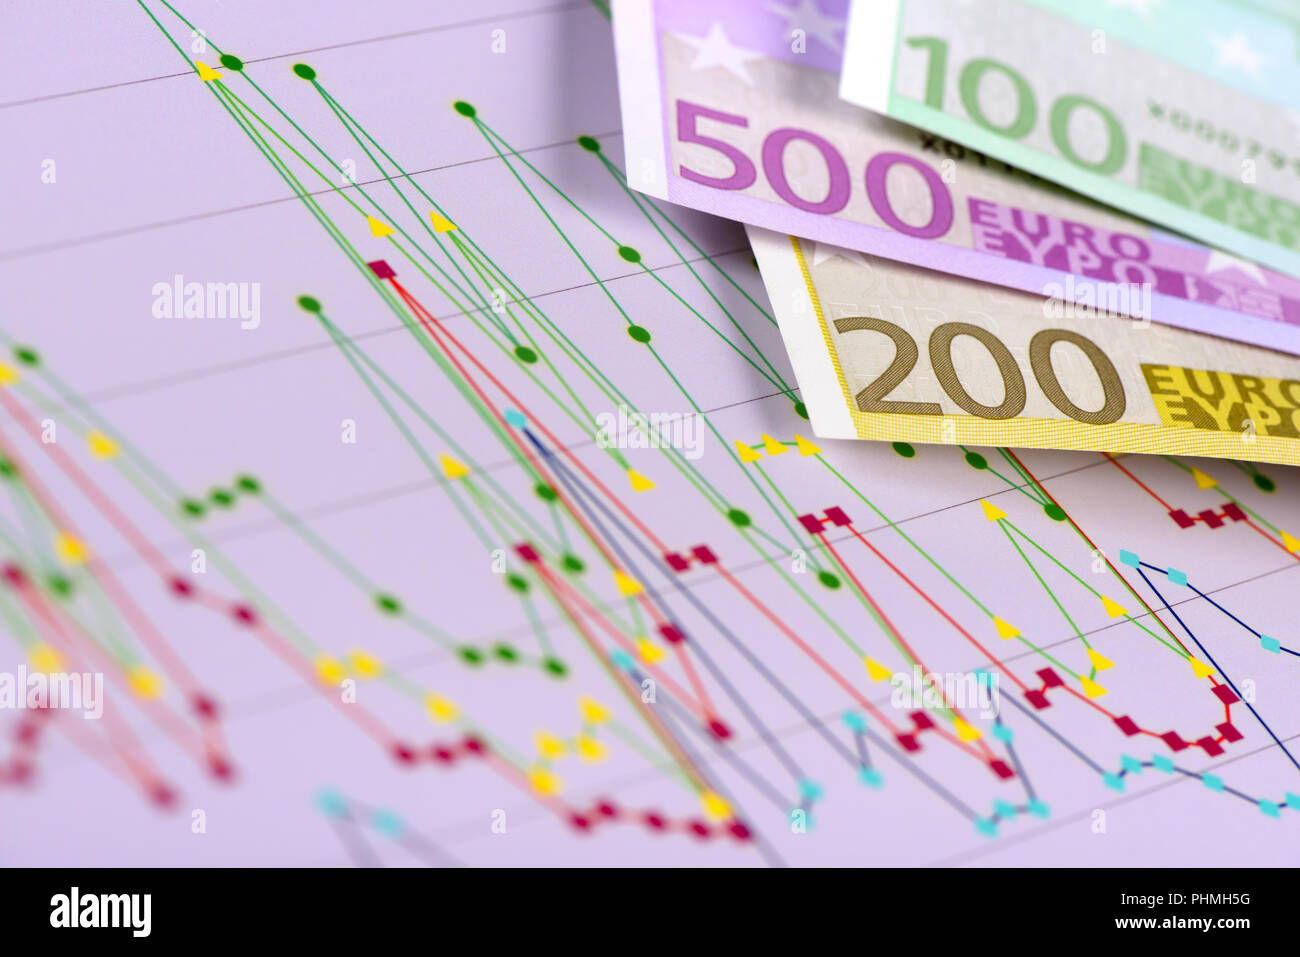 banknotes of European currency laying on chart of stock market Stock Photo